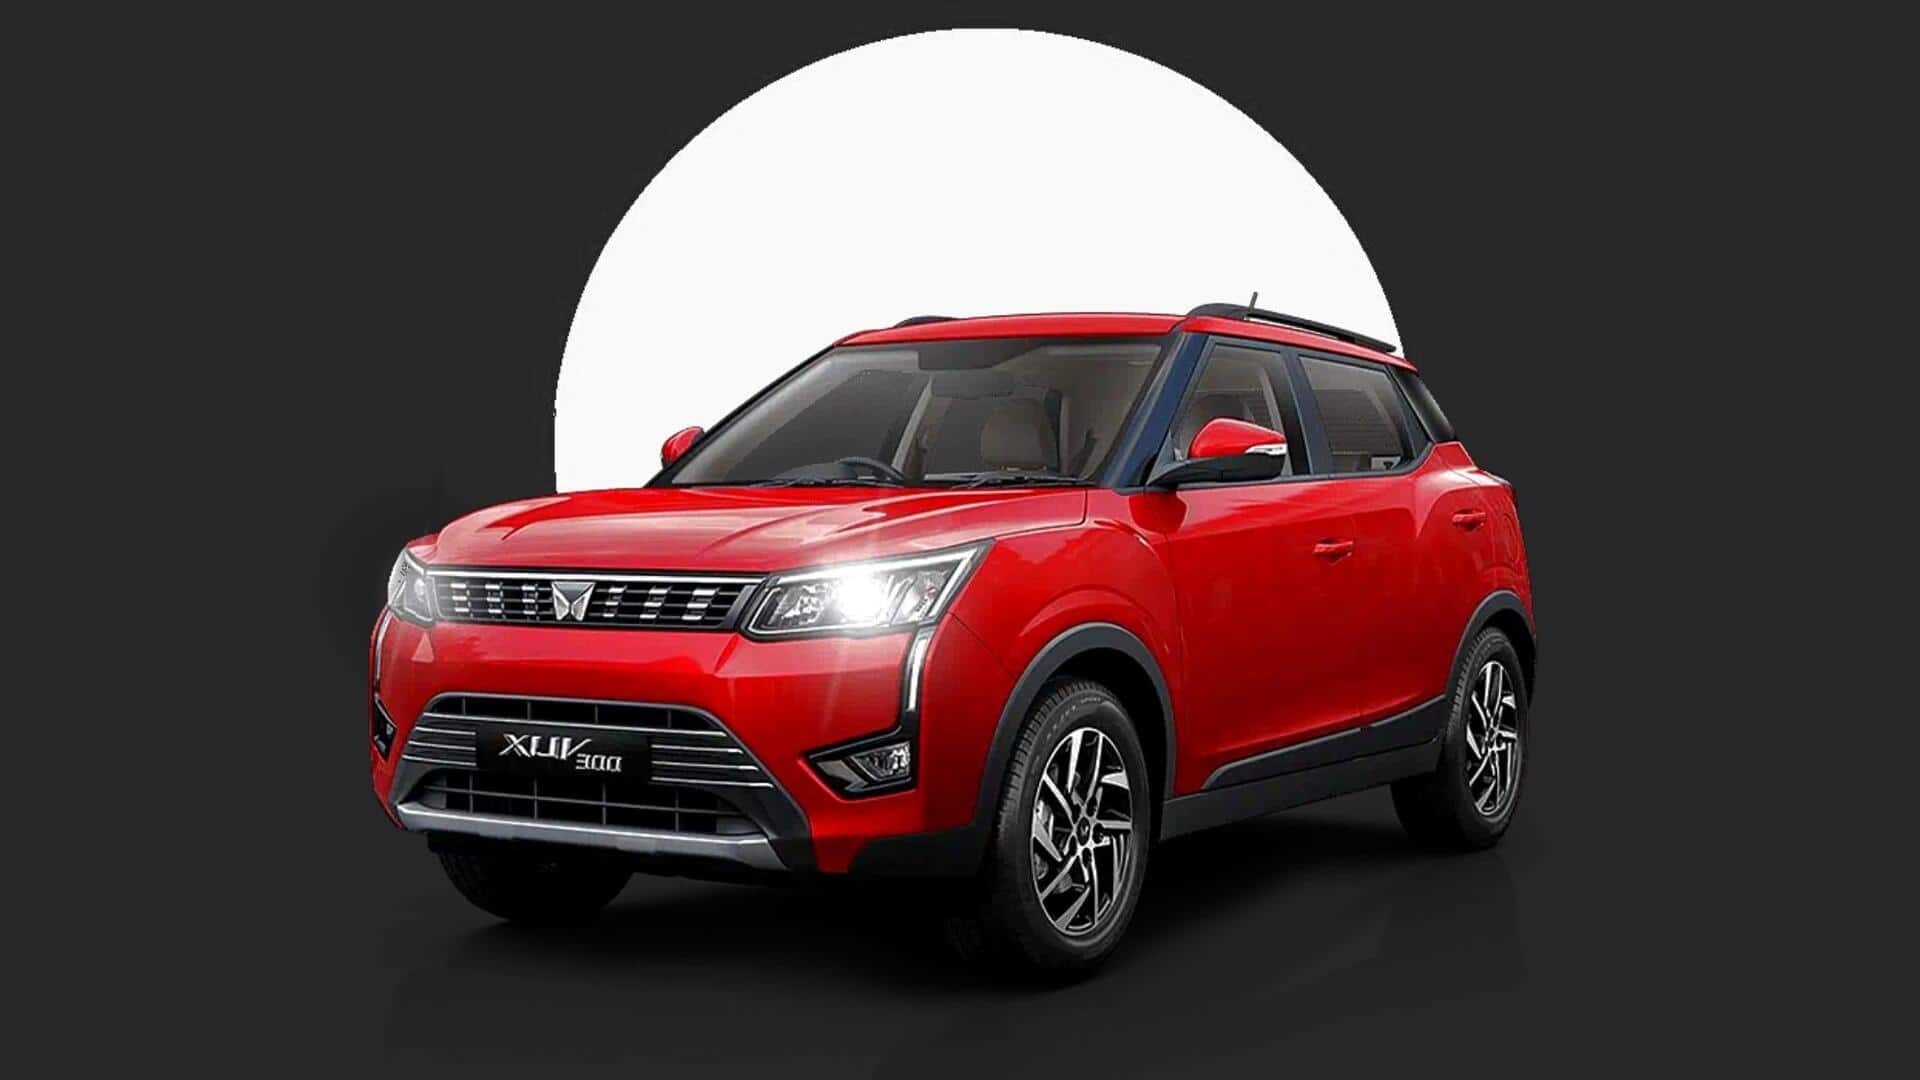 Mahindra gears up for XUV300 (facelift) launch amid rising competition